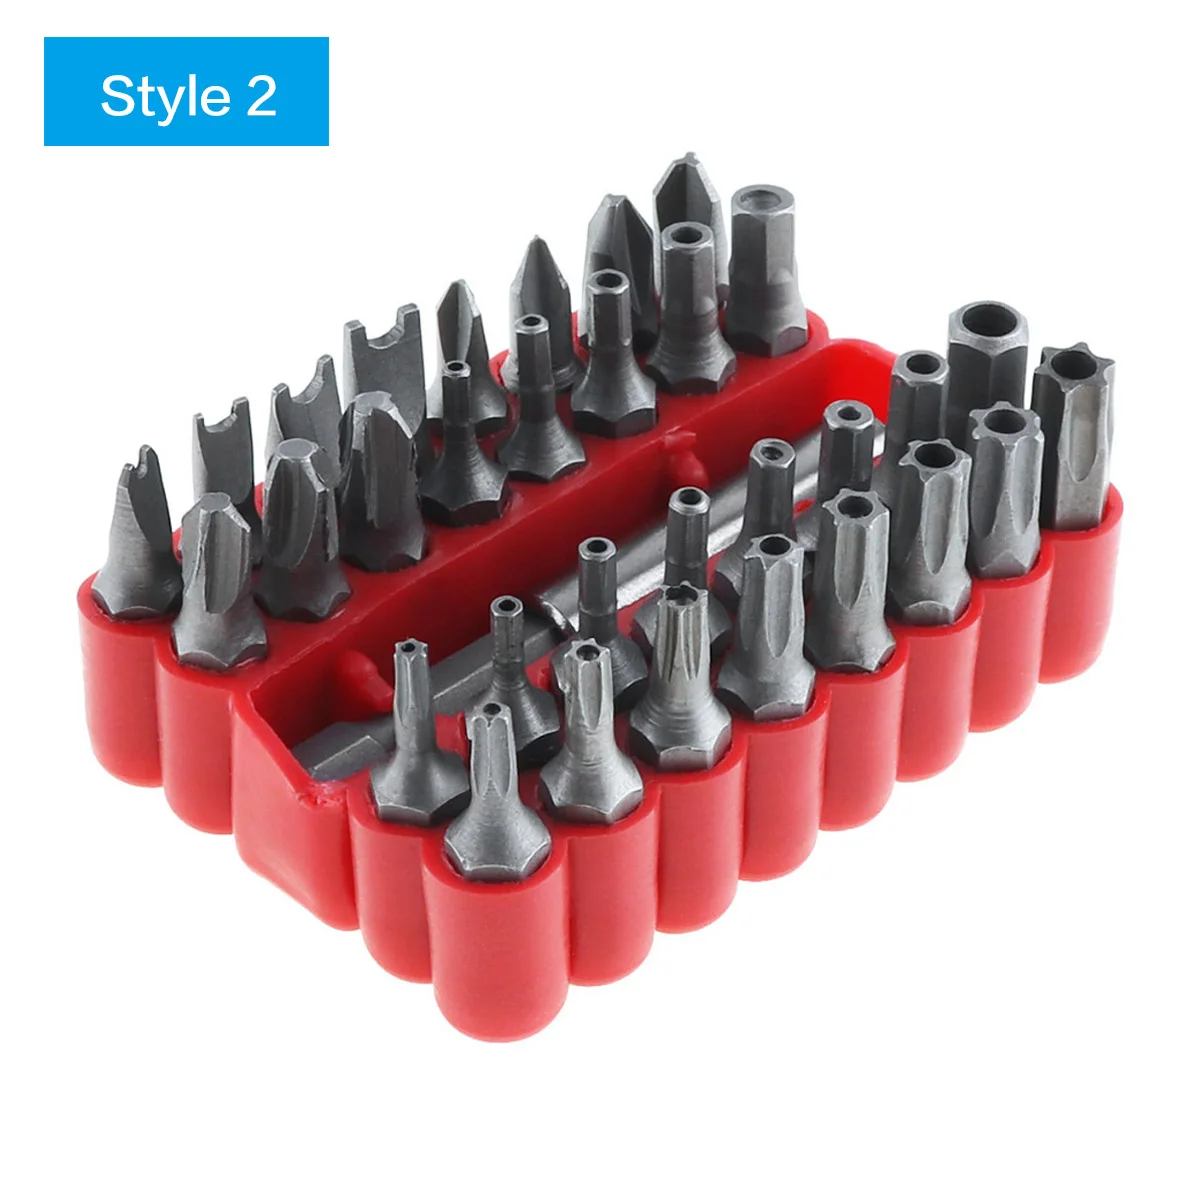 33-Piece Magnetic Screwdrivers Set Includes Slotted,Phillips Pozidriv Non-Slip Repair Tool Kit with Replaceable Screwdriver Bits for Repair Home Improvement Craft